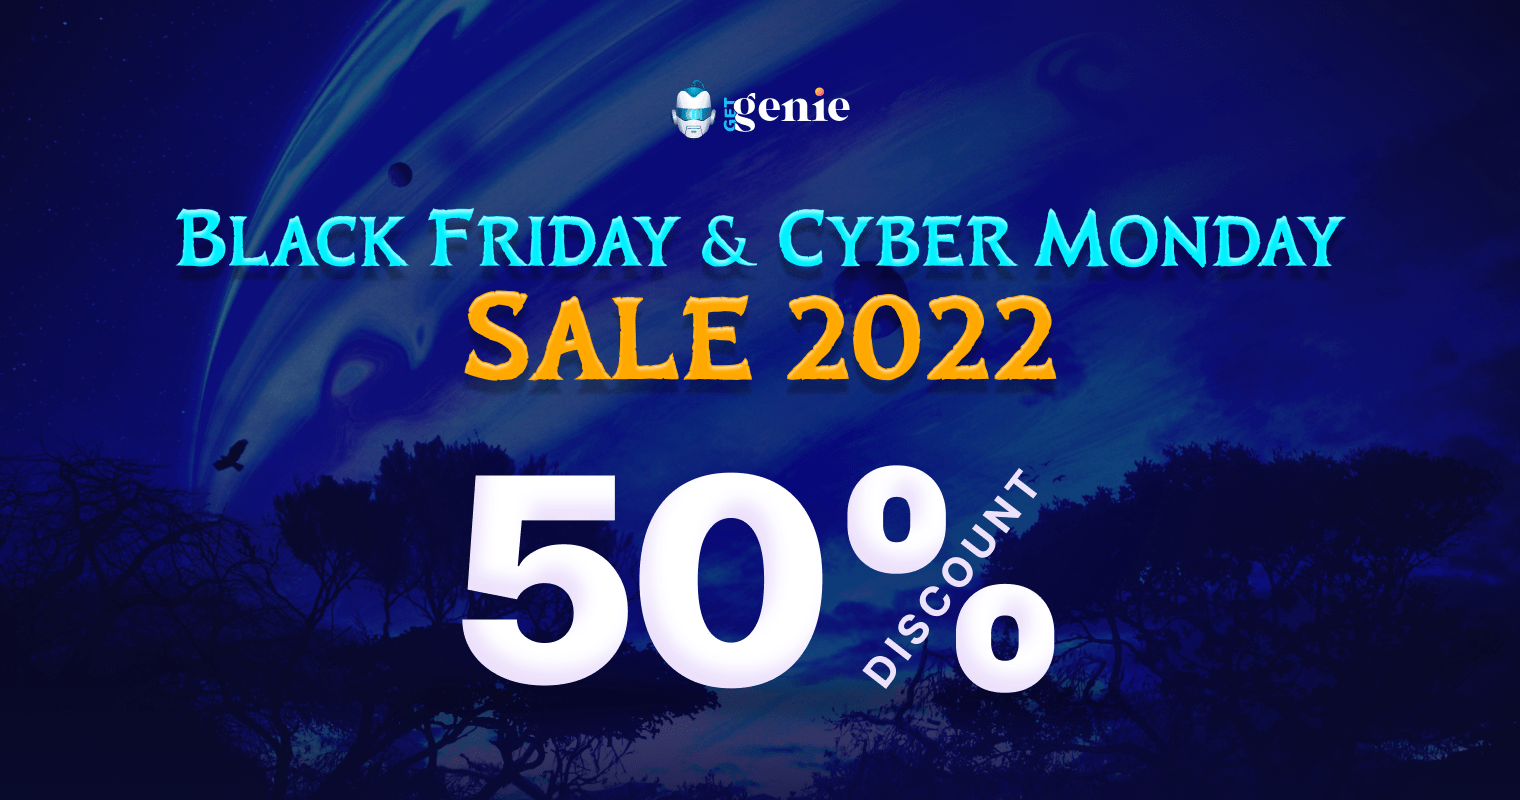 GetGenie Black Friday and Cyber Monday Deal 2022